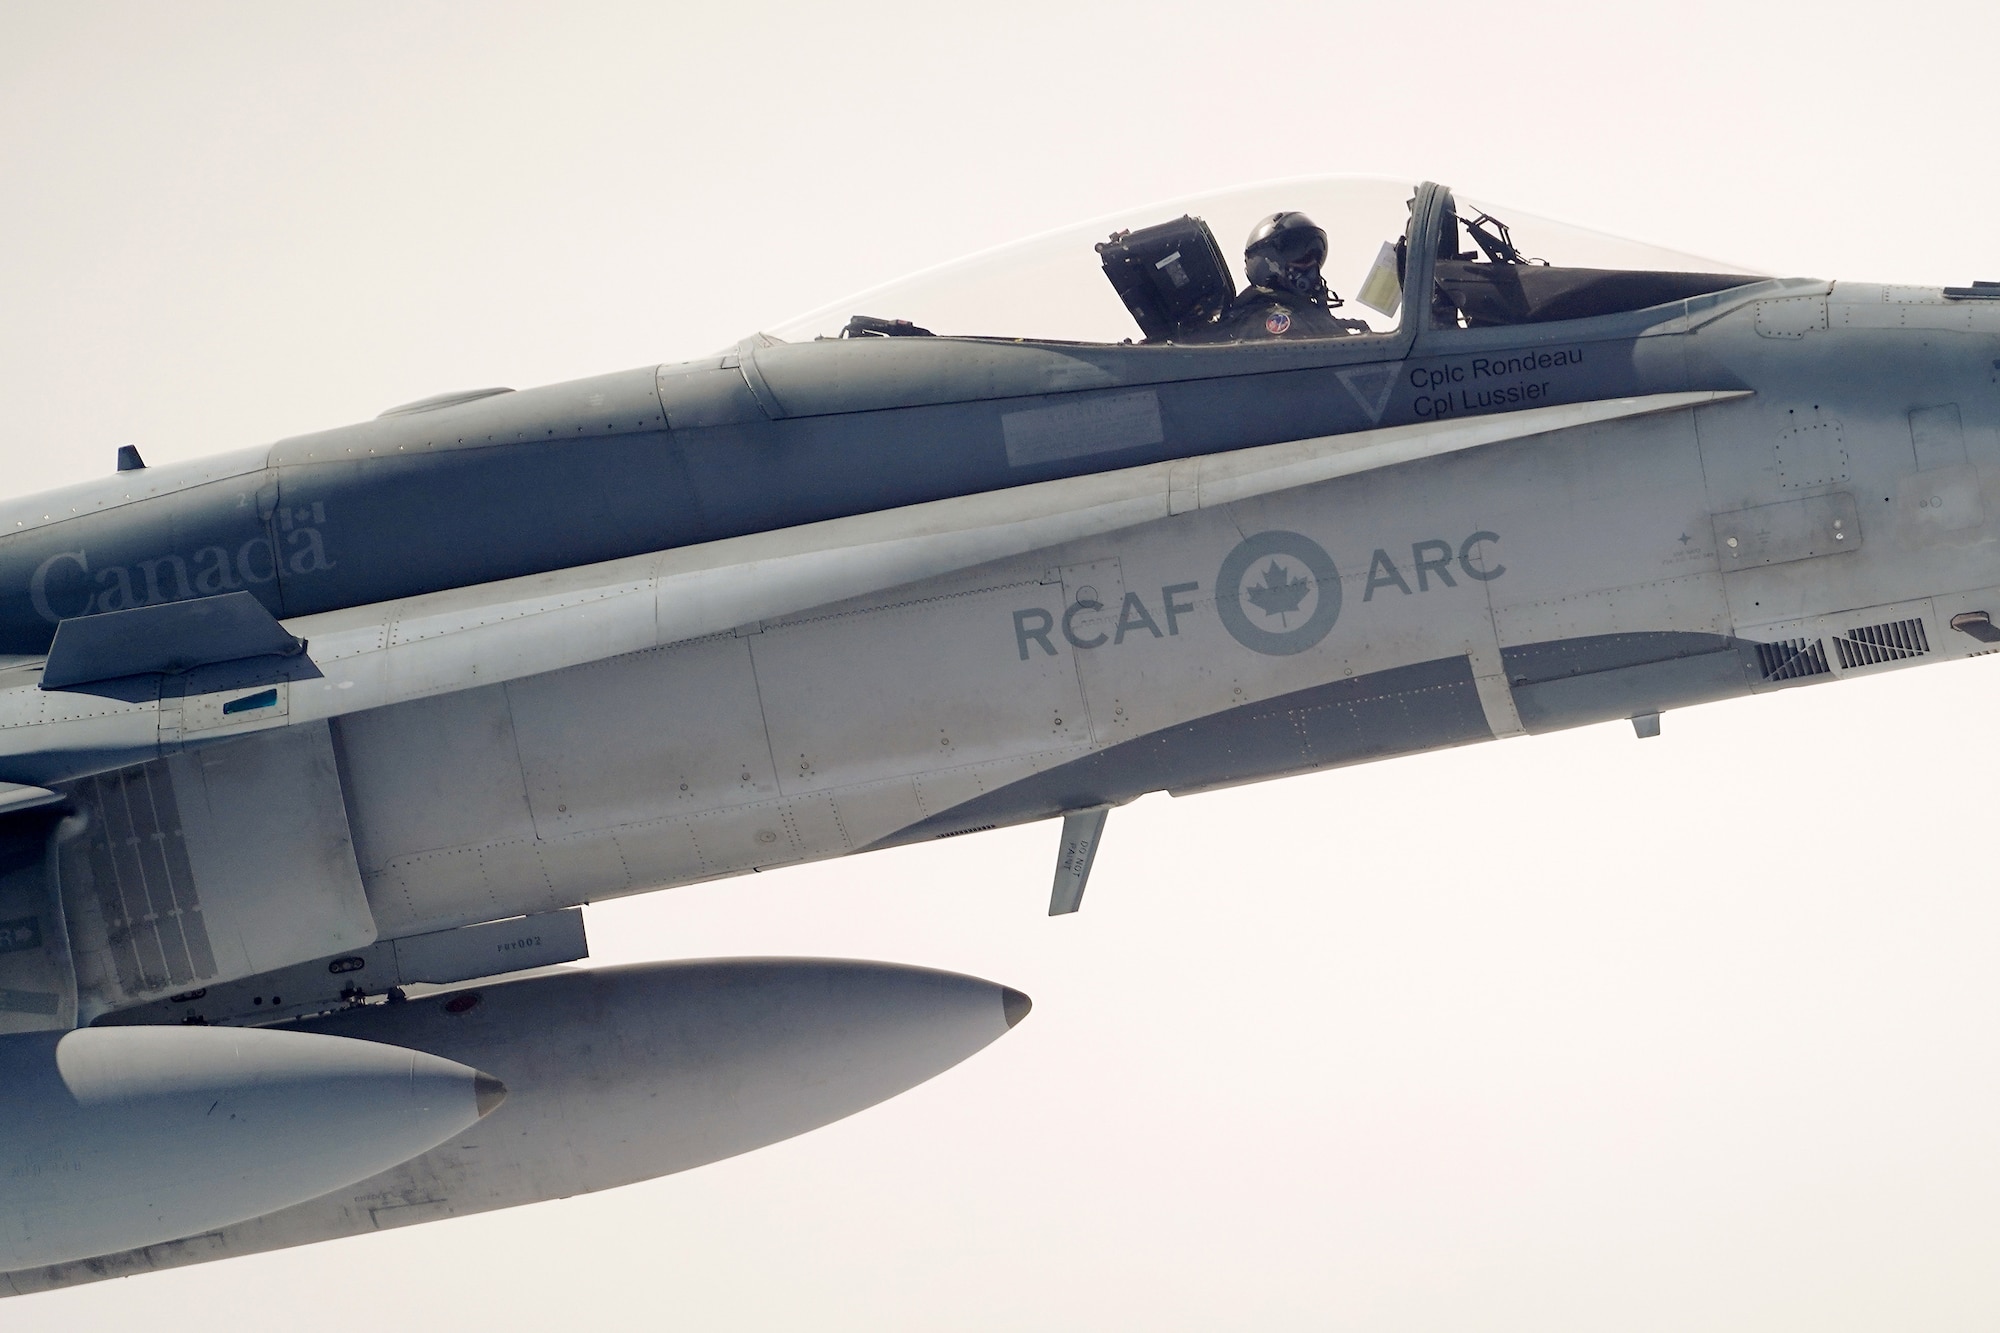 A Royal Canadian Air Force pilot in a CF-18 Hornet pull up to a CC-150 Polaris refueling tanker as RCAF Airmen assigned to the 437th Transport Squadron based out of Canadian Forces Base Trenton, Canada, perform refueling operations in training airspace over Alaska during the Red Flag-Alaska 19-3 exercise, Aug. 15, 2019. Red Flag-Alaska, a series of Pacific Air Forces commander-directed field training exercises for U.S. forces, provides joint offensive counter-air, interdiction, close air support, and large force employment training in a simulated combat environment.